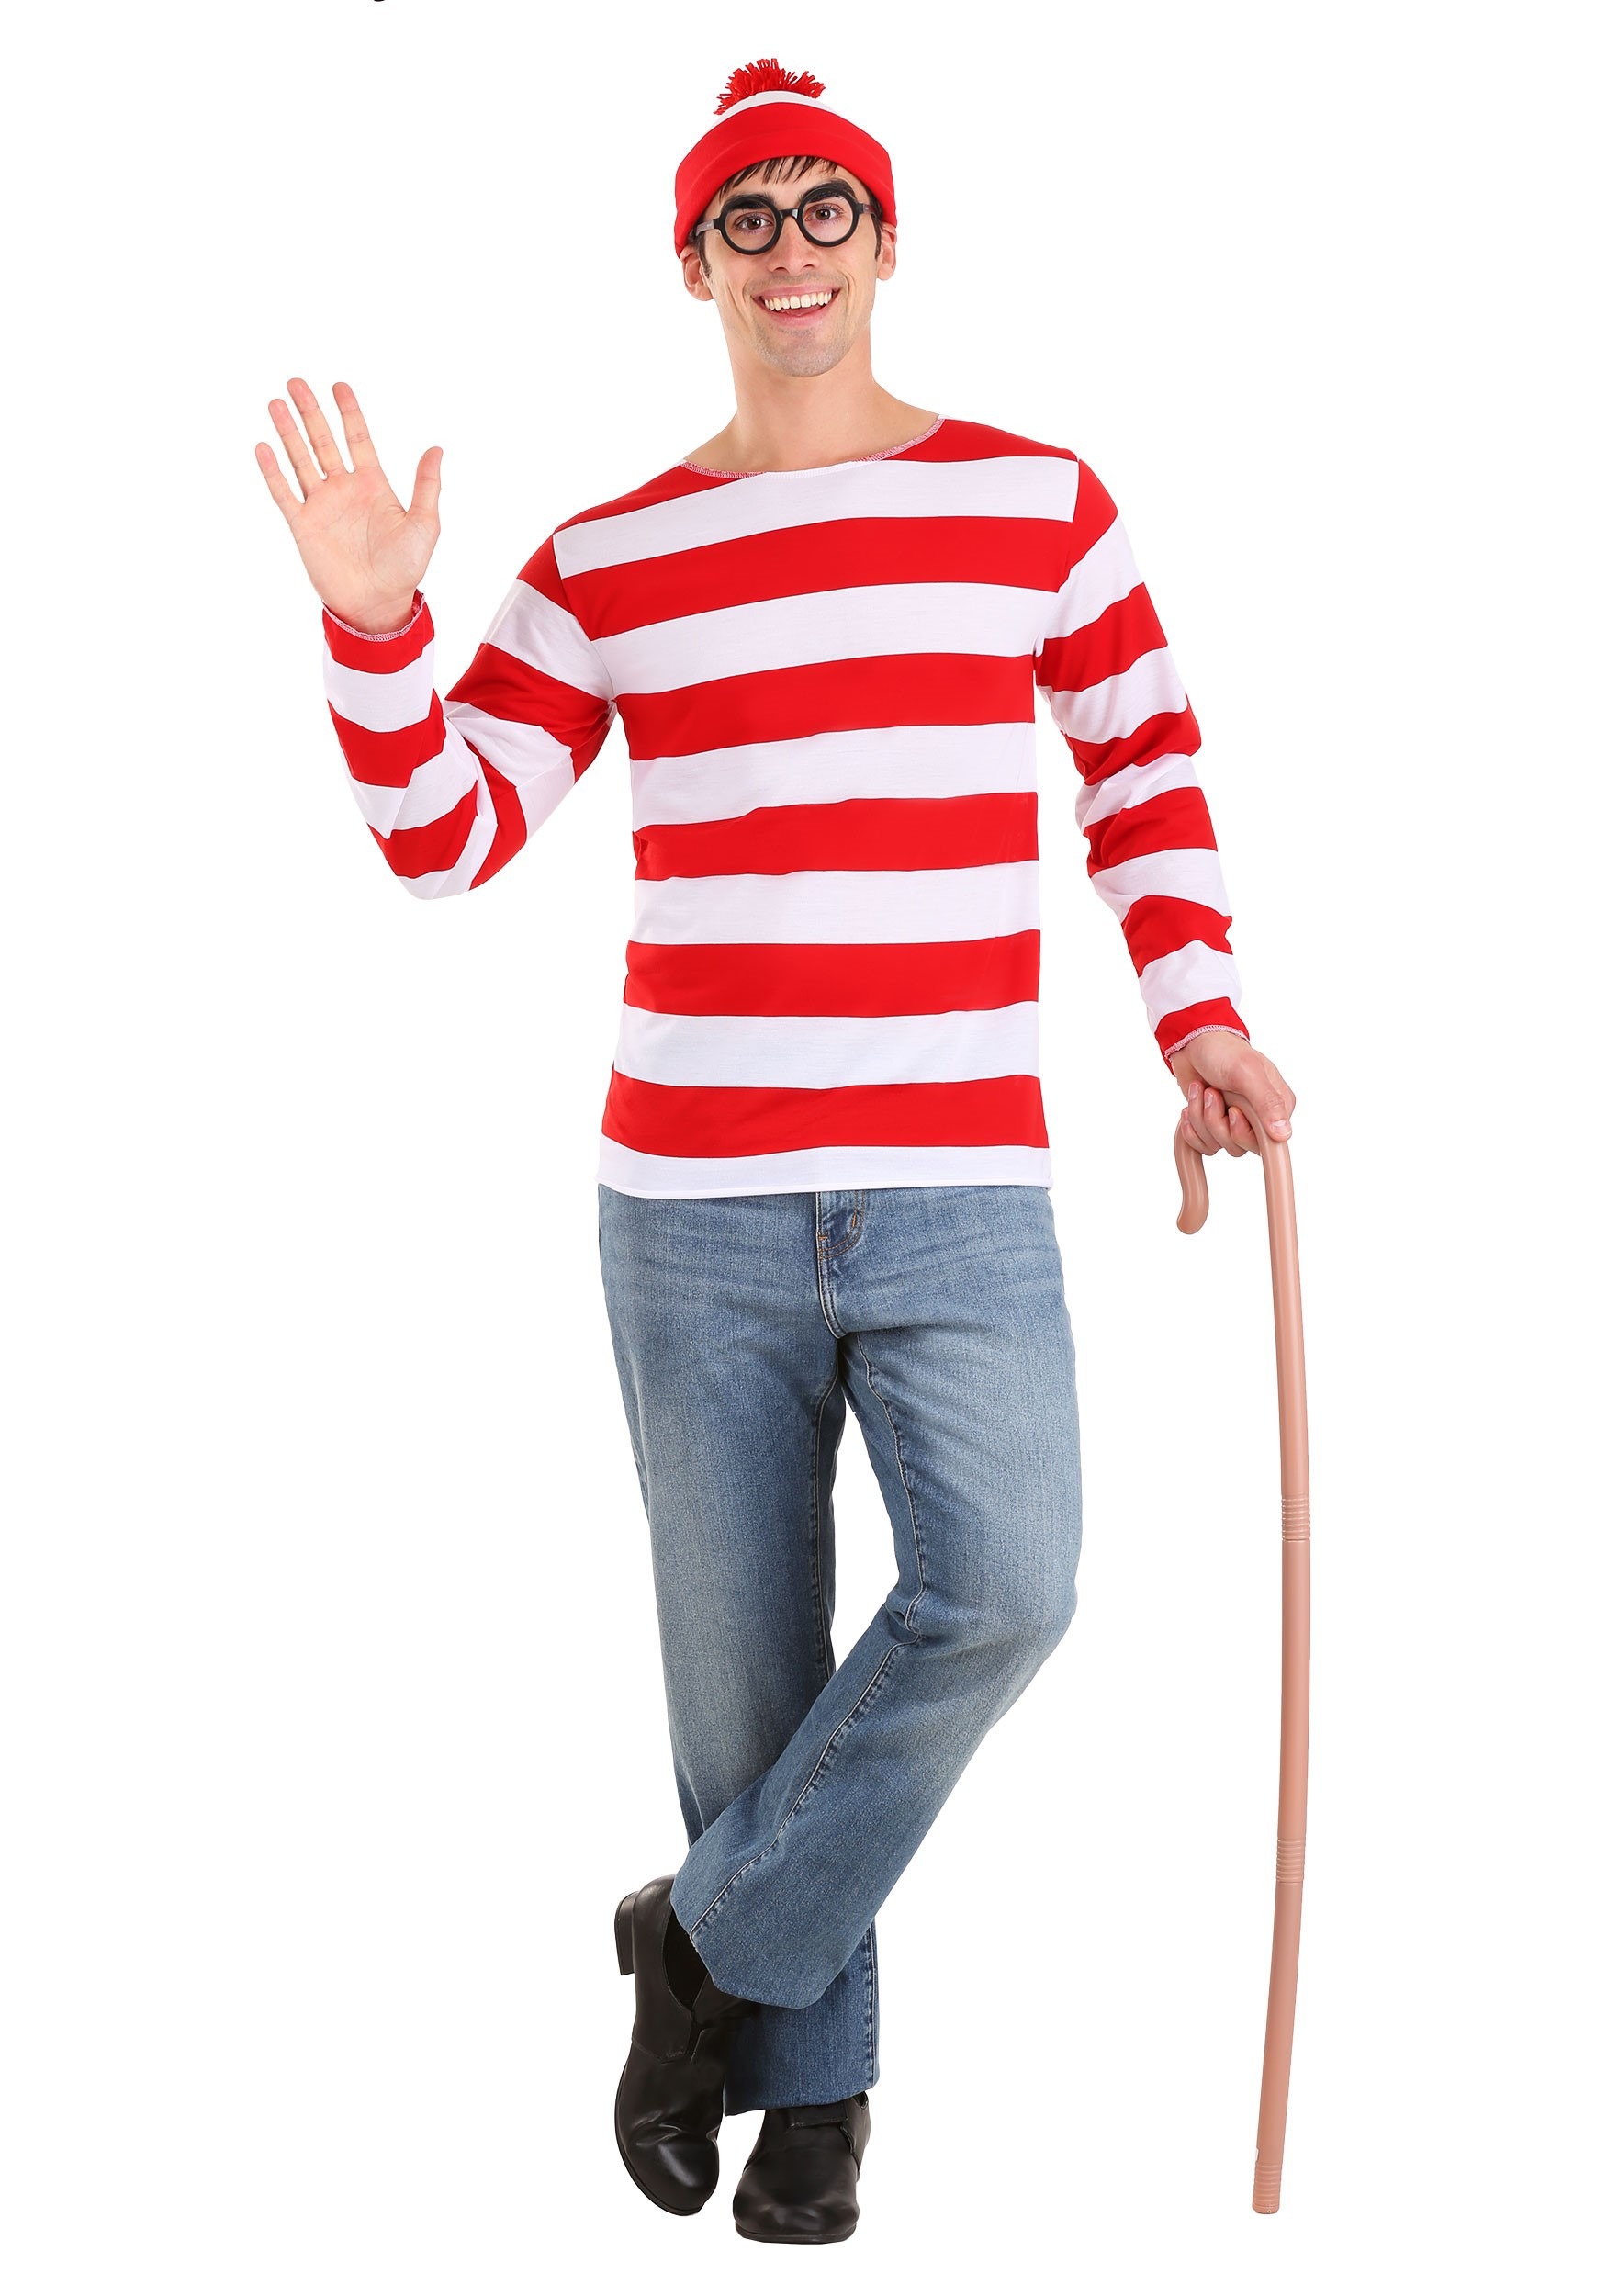 Where’s Waldo Costume for Adults